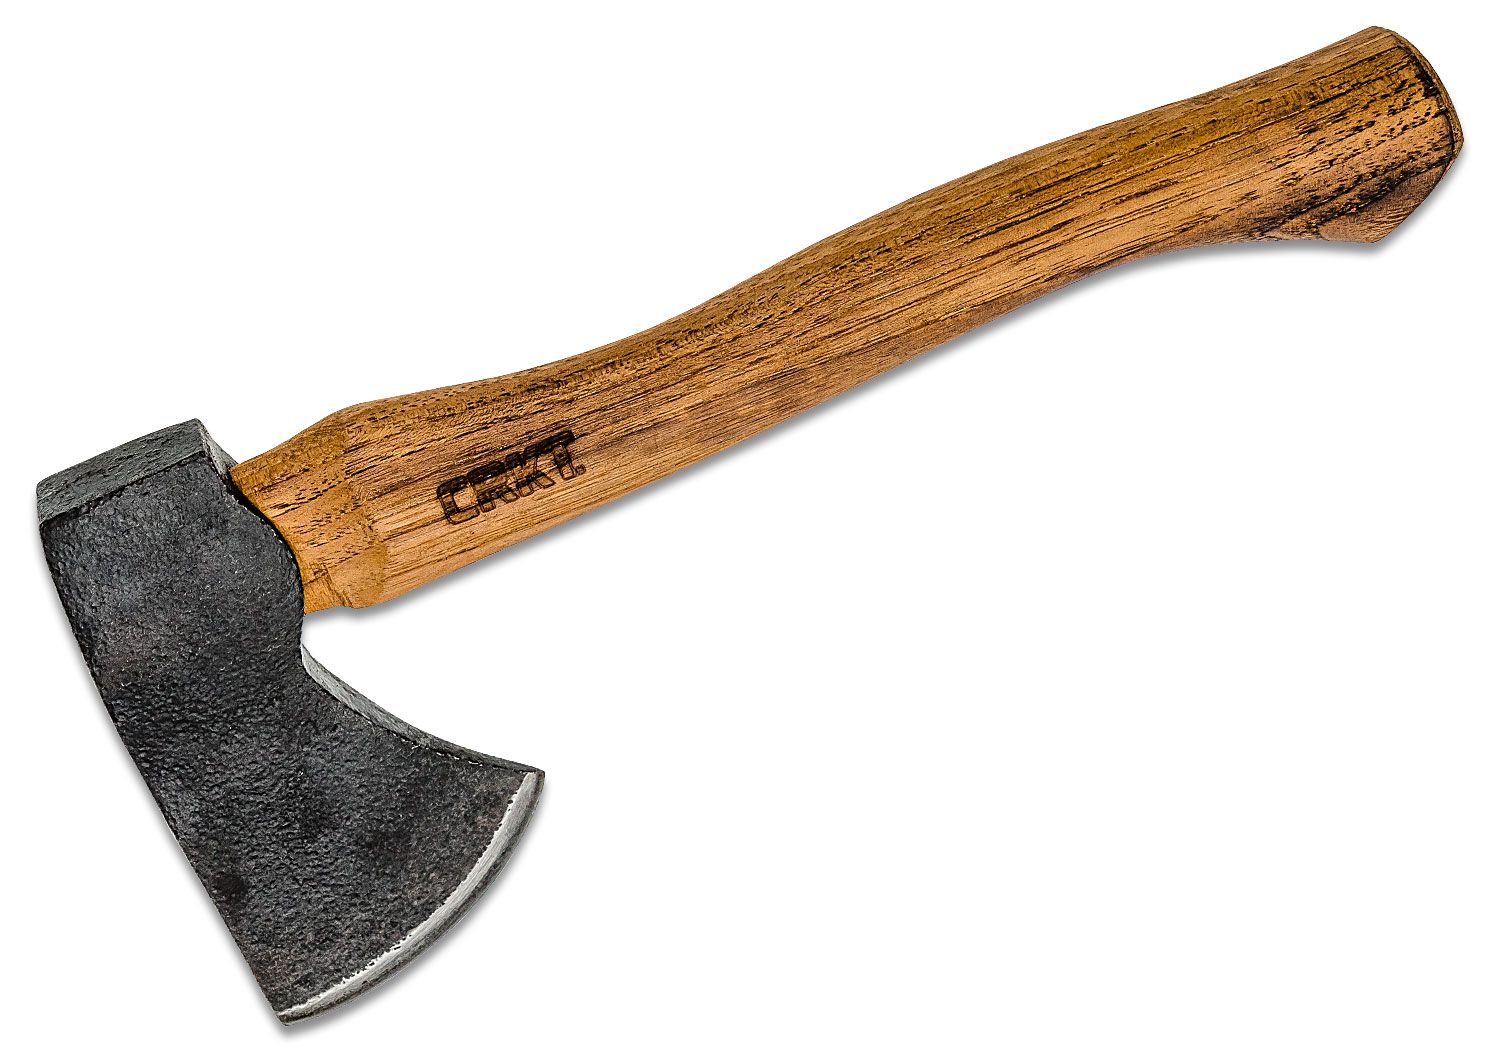 Columbia River CRKT 2748 Elmer Roush Pack Axe, Tennessee Hickory